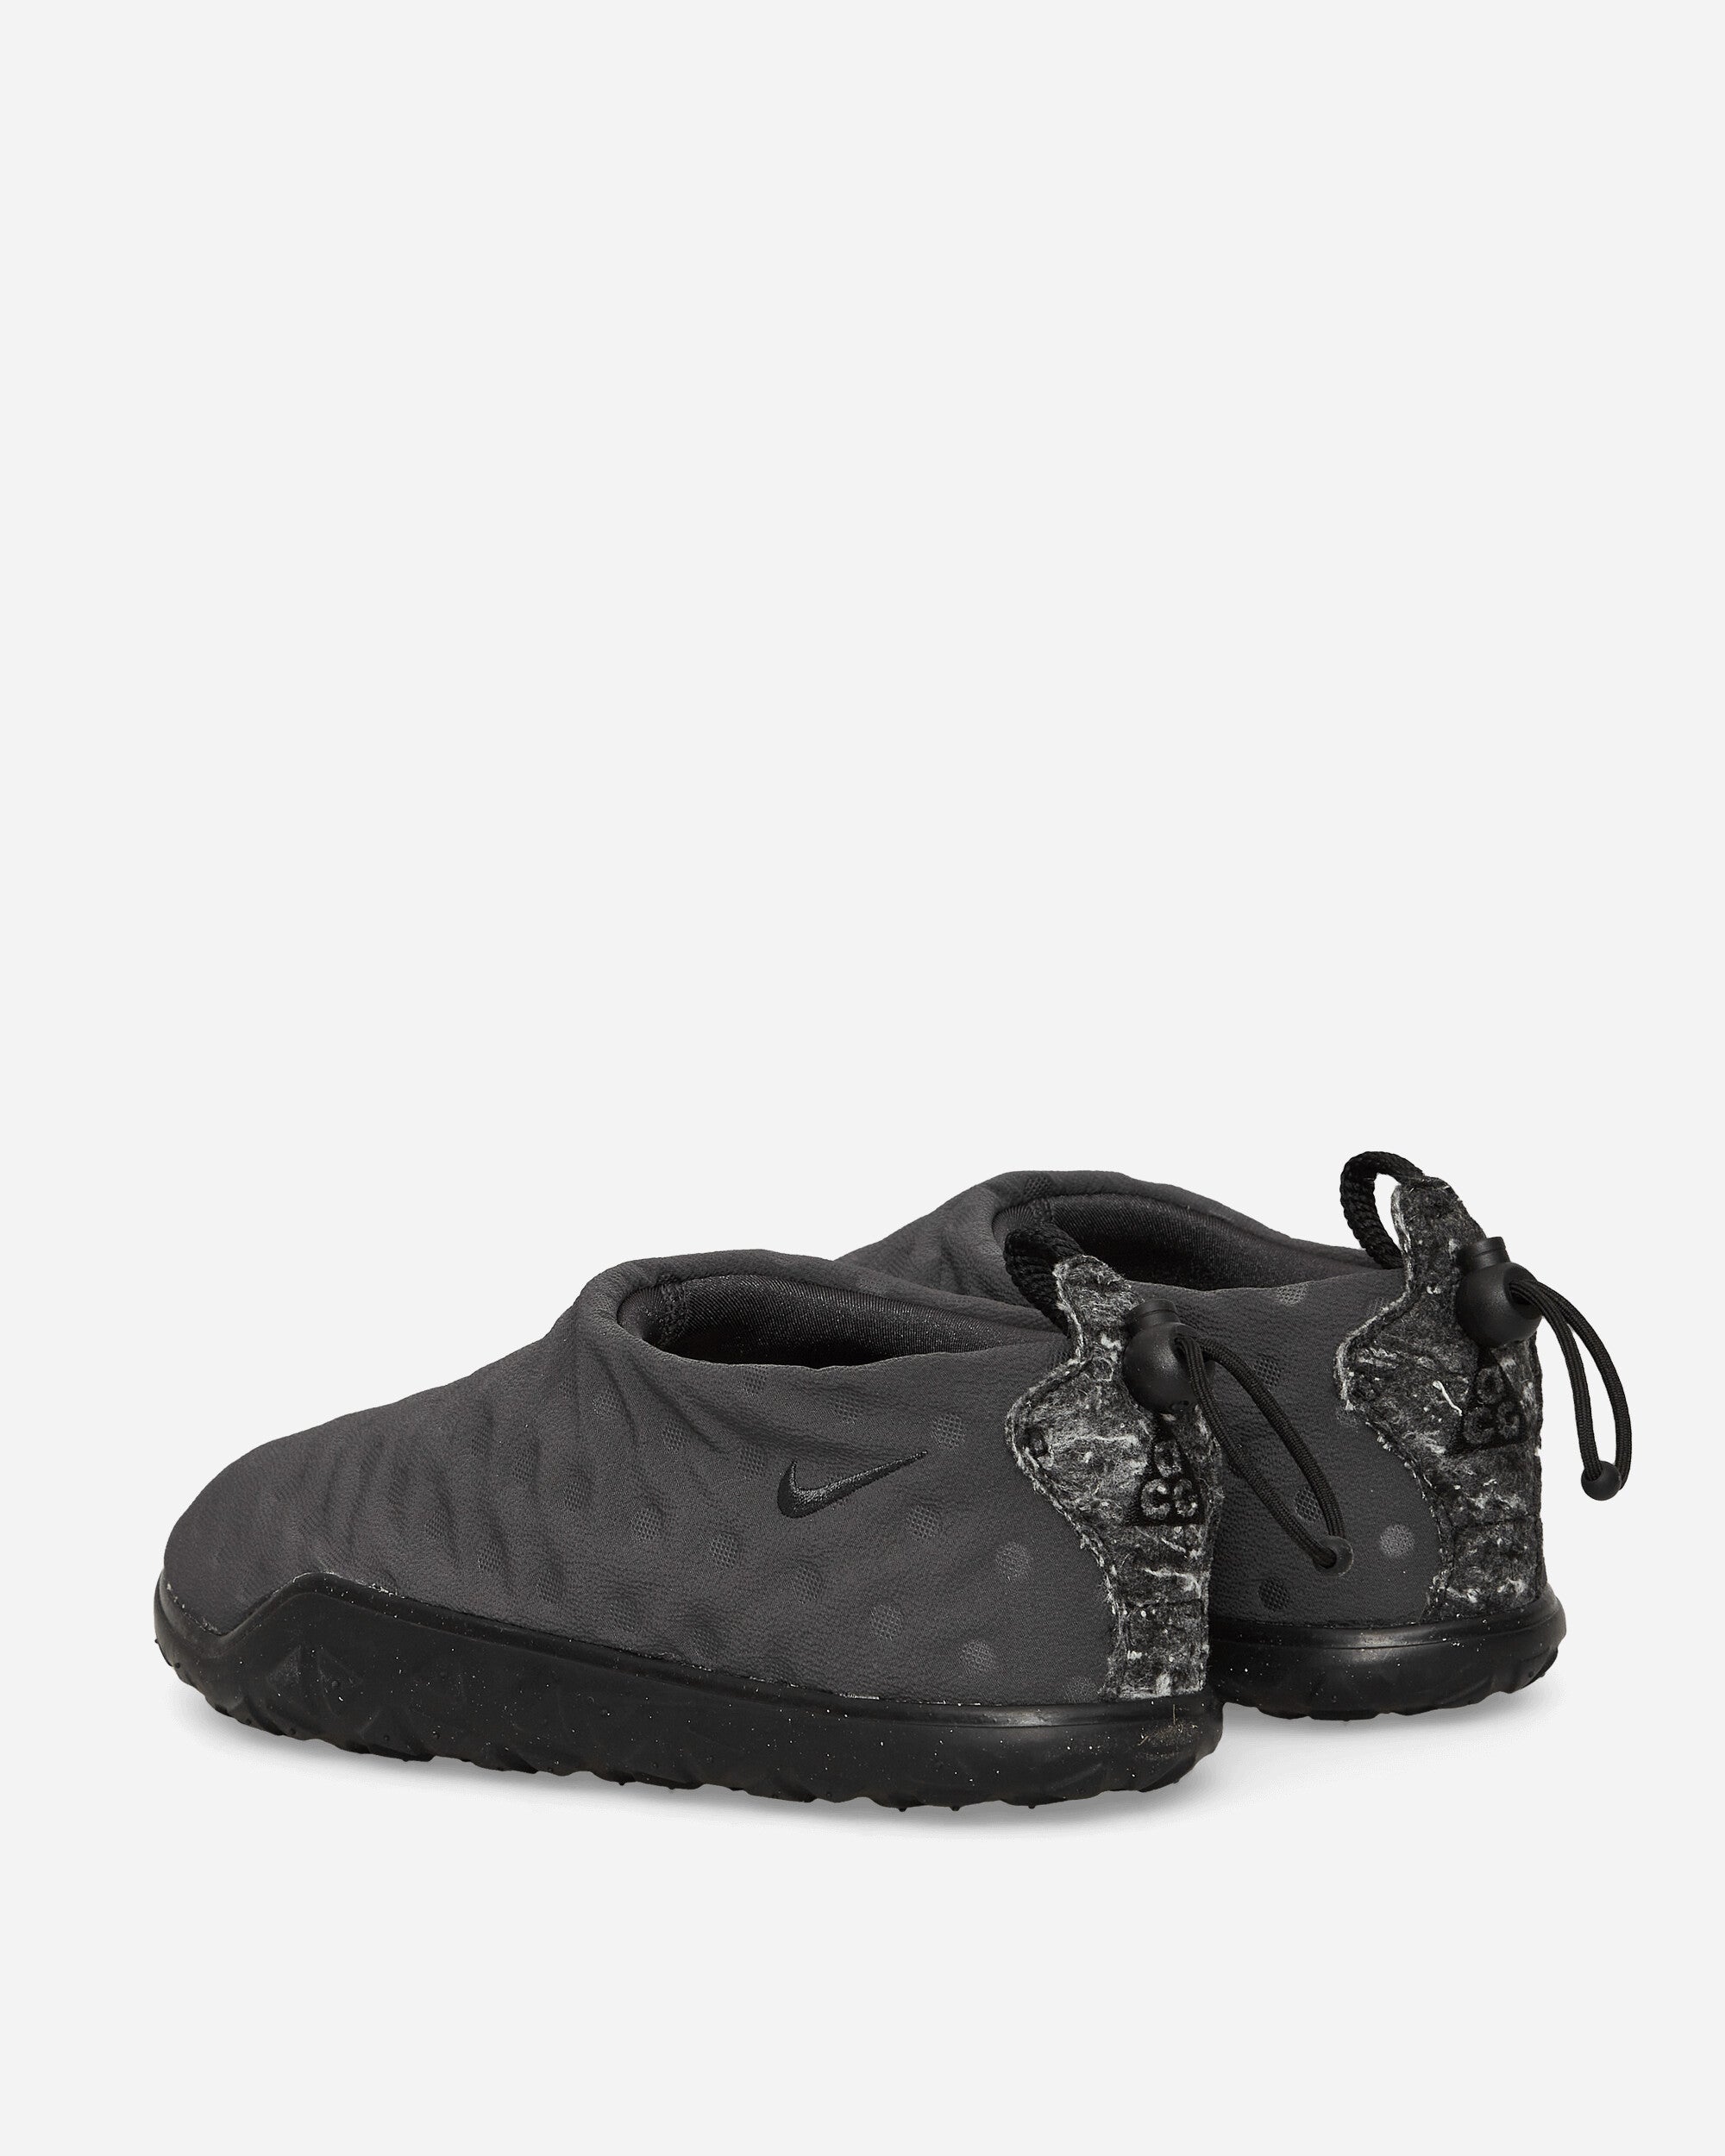 Nike Acg Moc Anthracite/Black Sneakers Low DQ6453-001